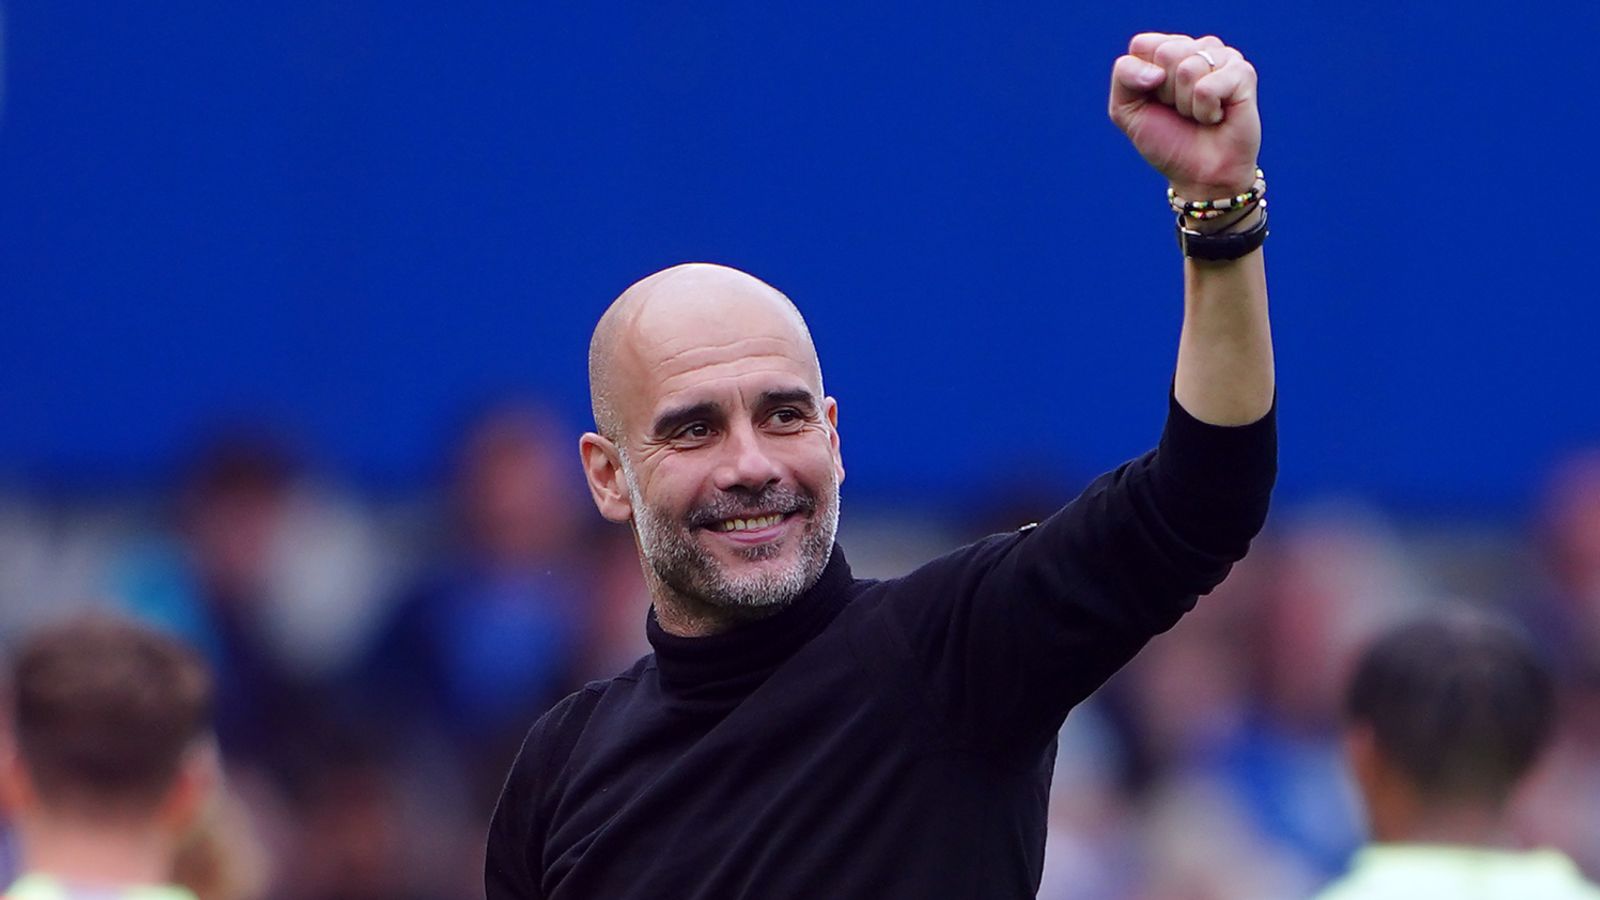 Pep Guardiola says his legacy is 'already exceptional' even if Man City don't win treble ahead of Real Madrid showdown | Football News